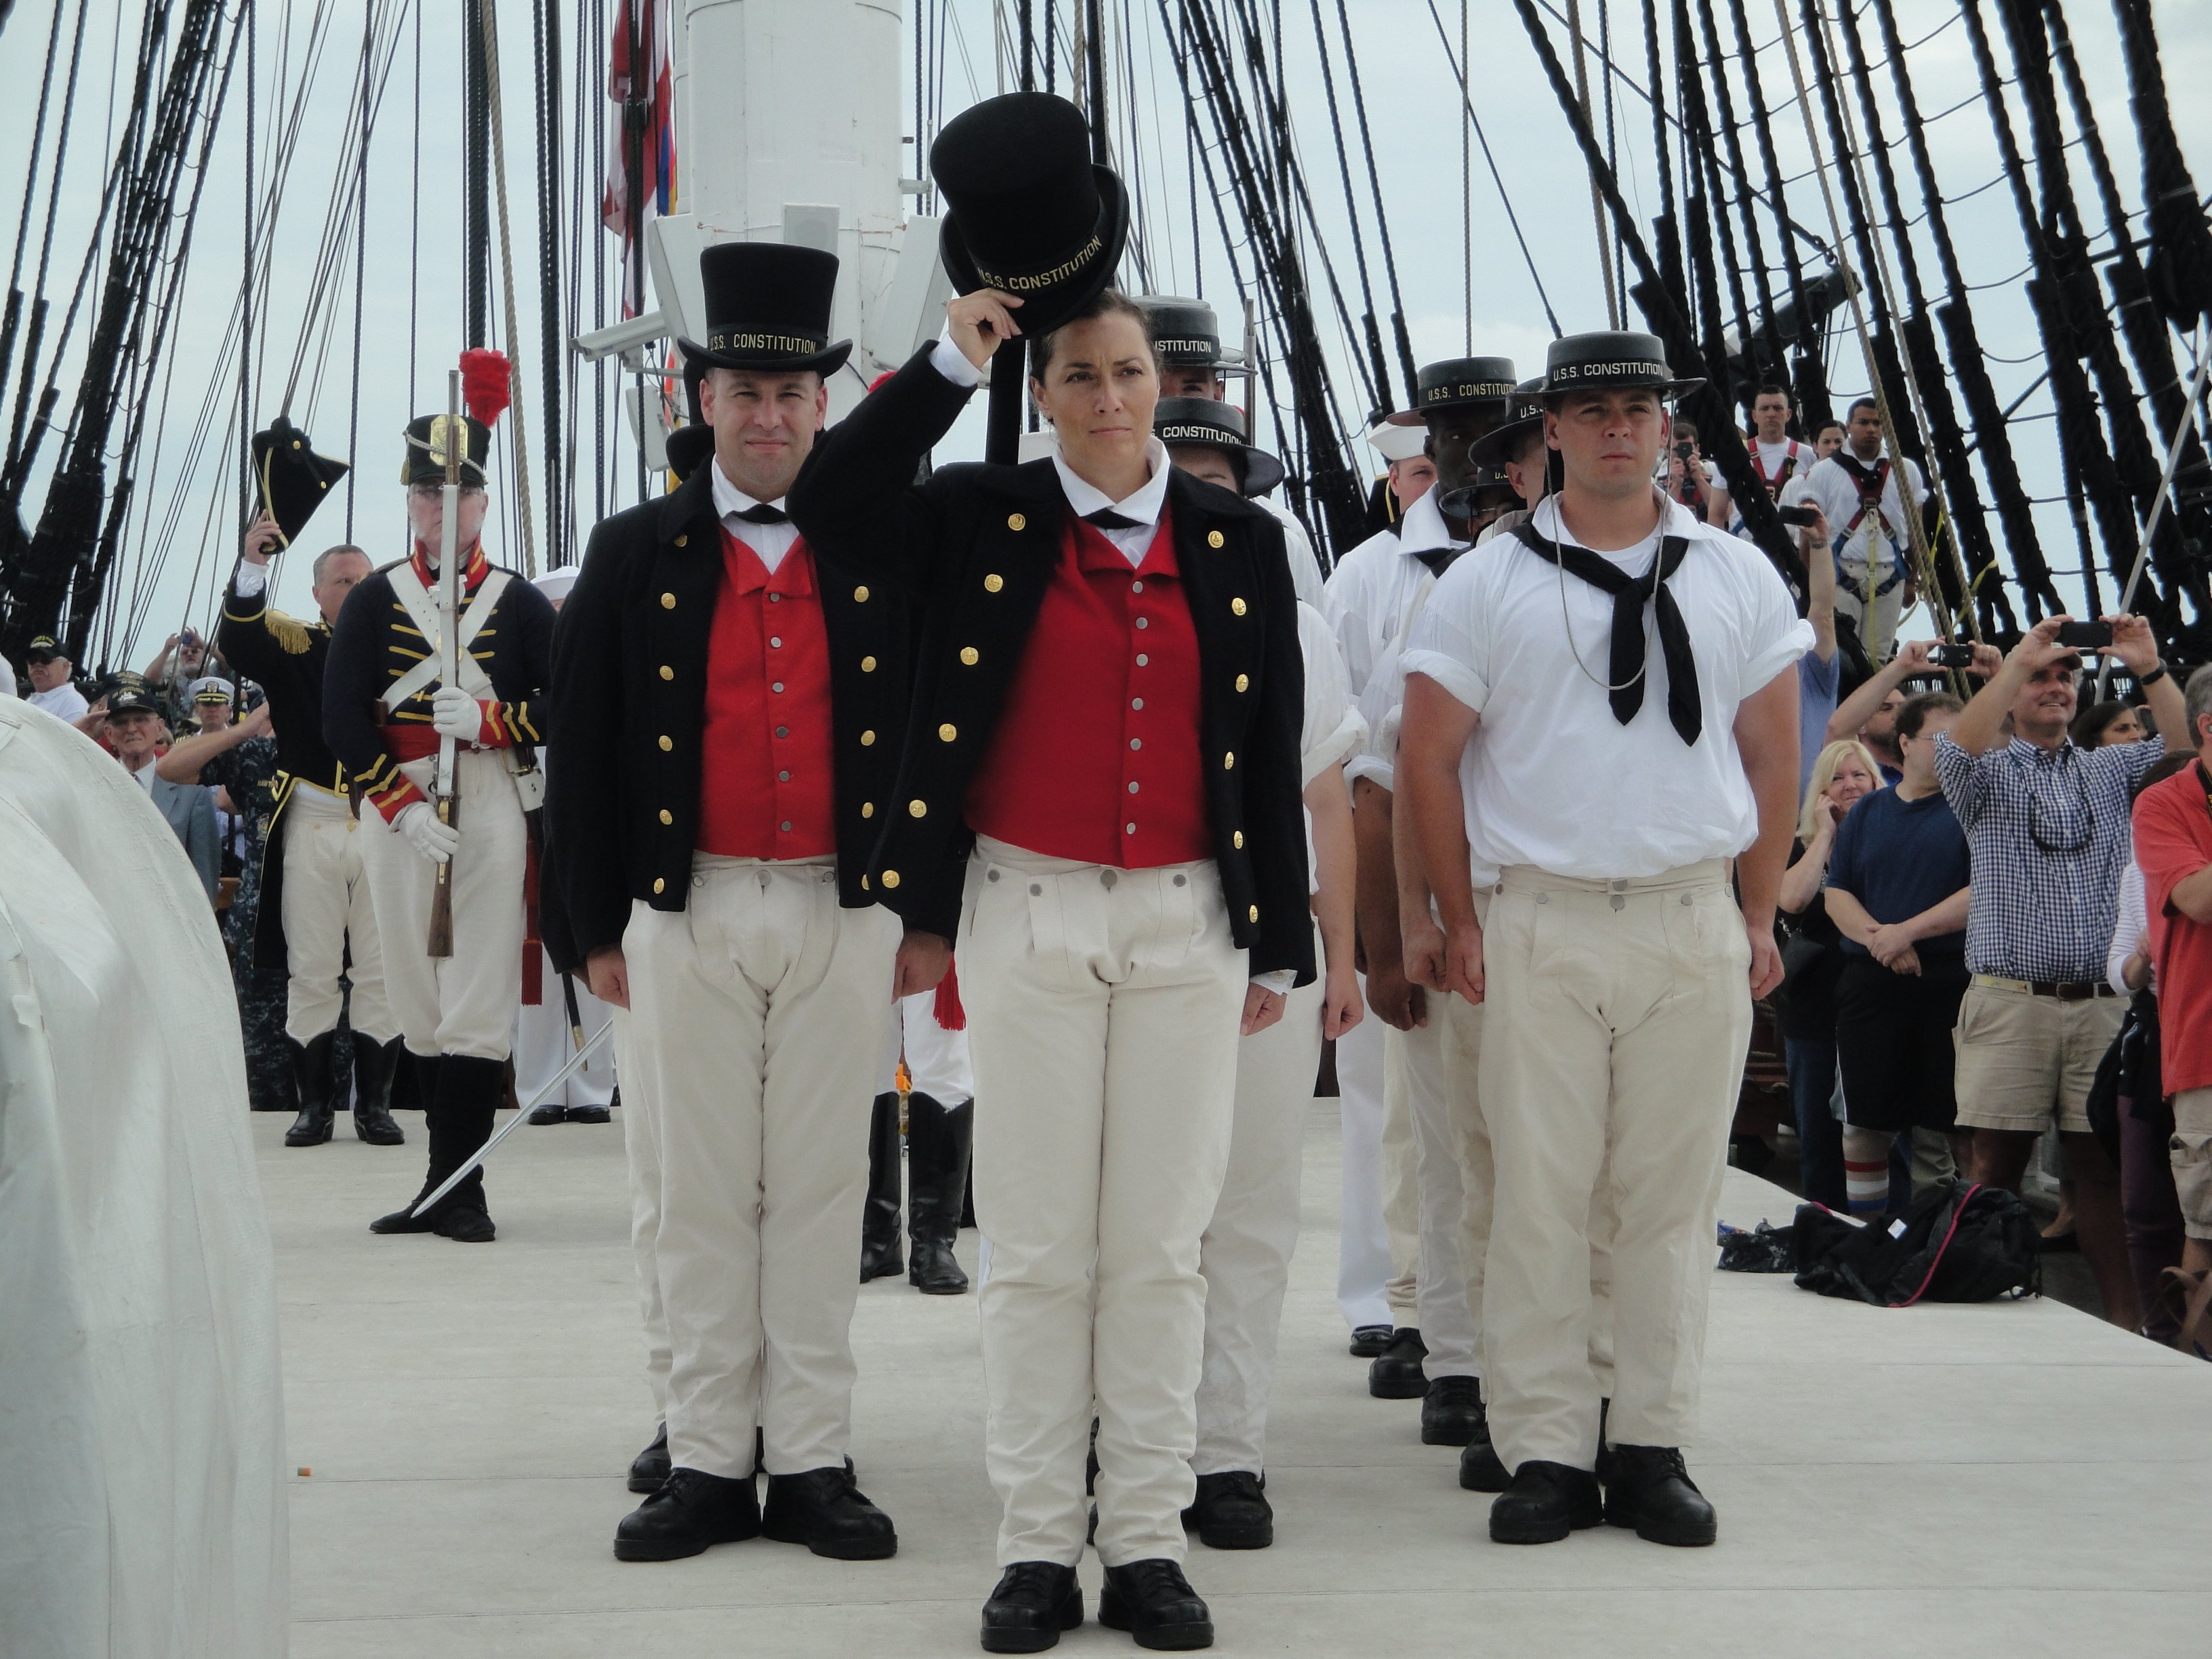 Constitution sailors salute Ft. Independence during a July 4, 2014 underway for the ship. Glenn Moyer Photo